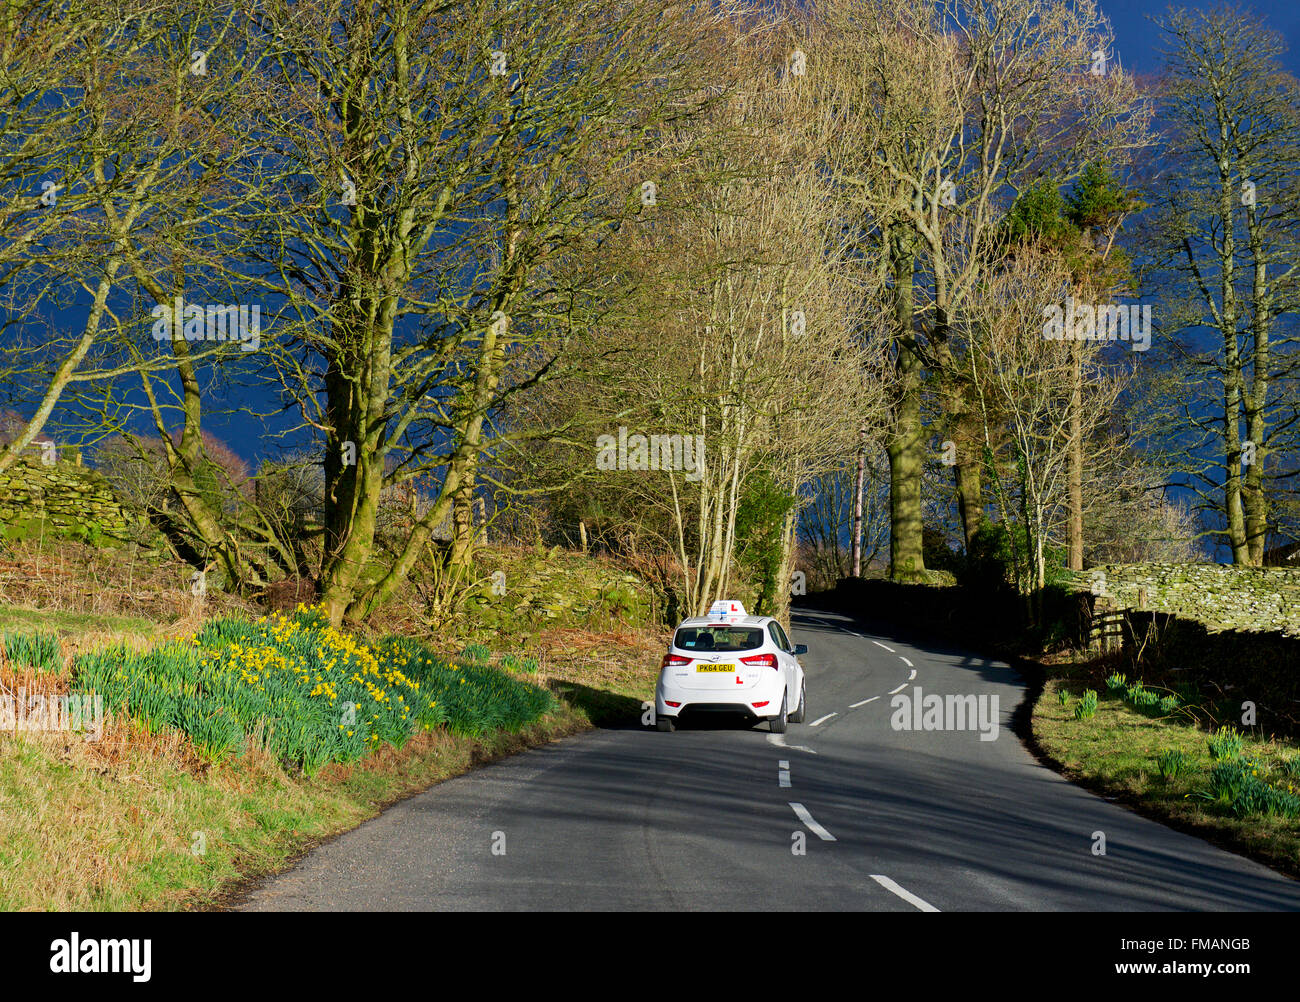 Car on country road in springtime, Cumbria, England UK Stock Photo